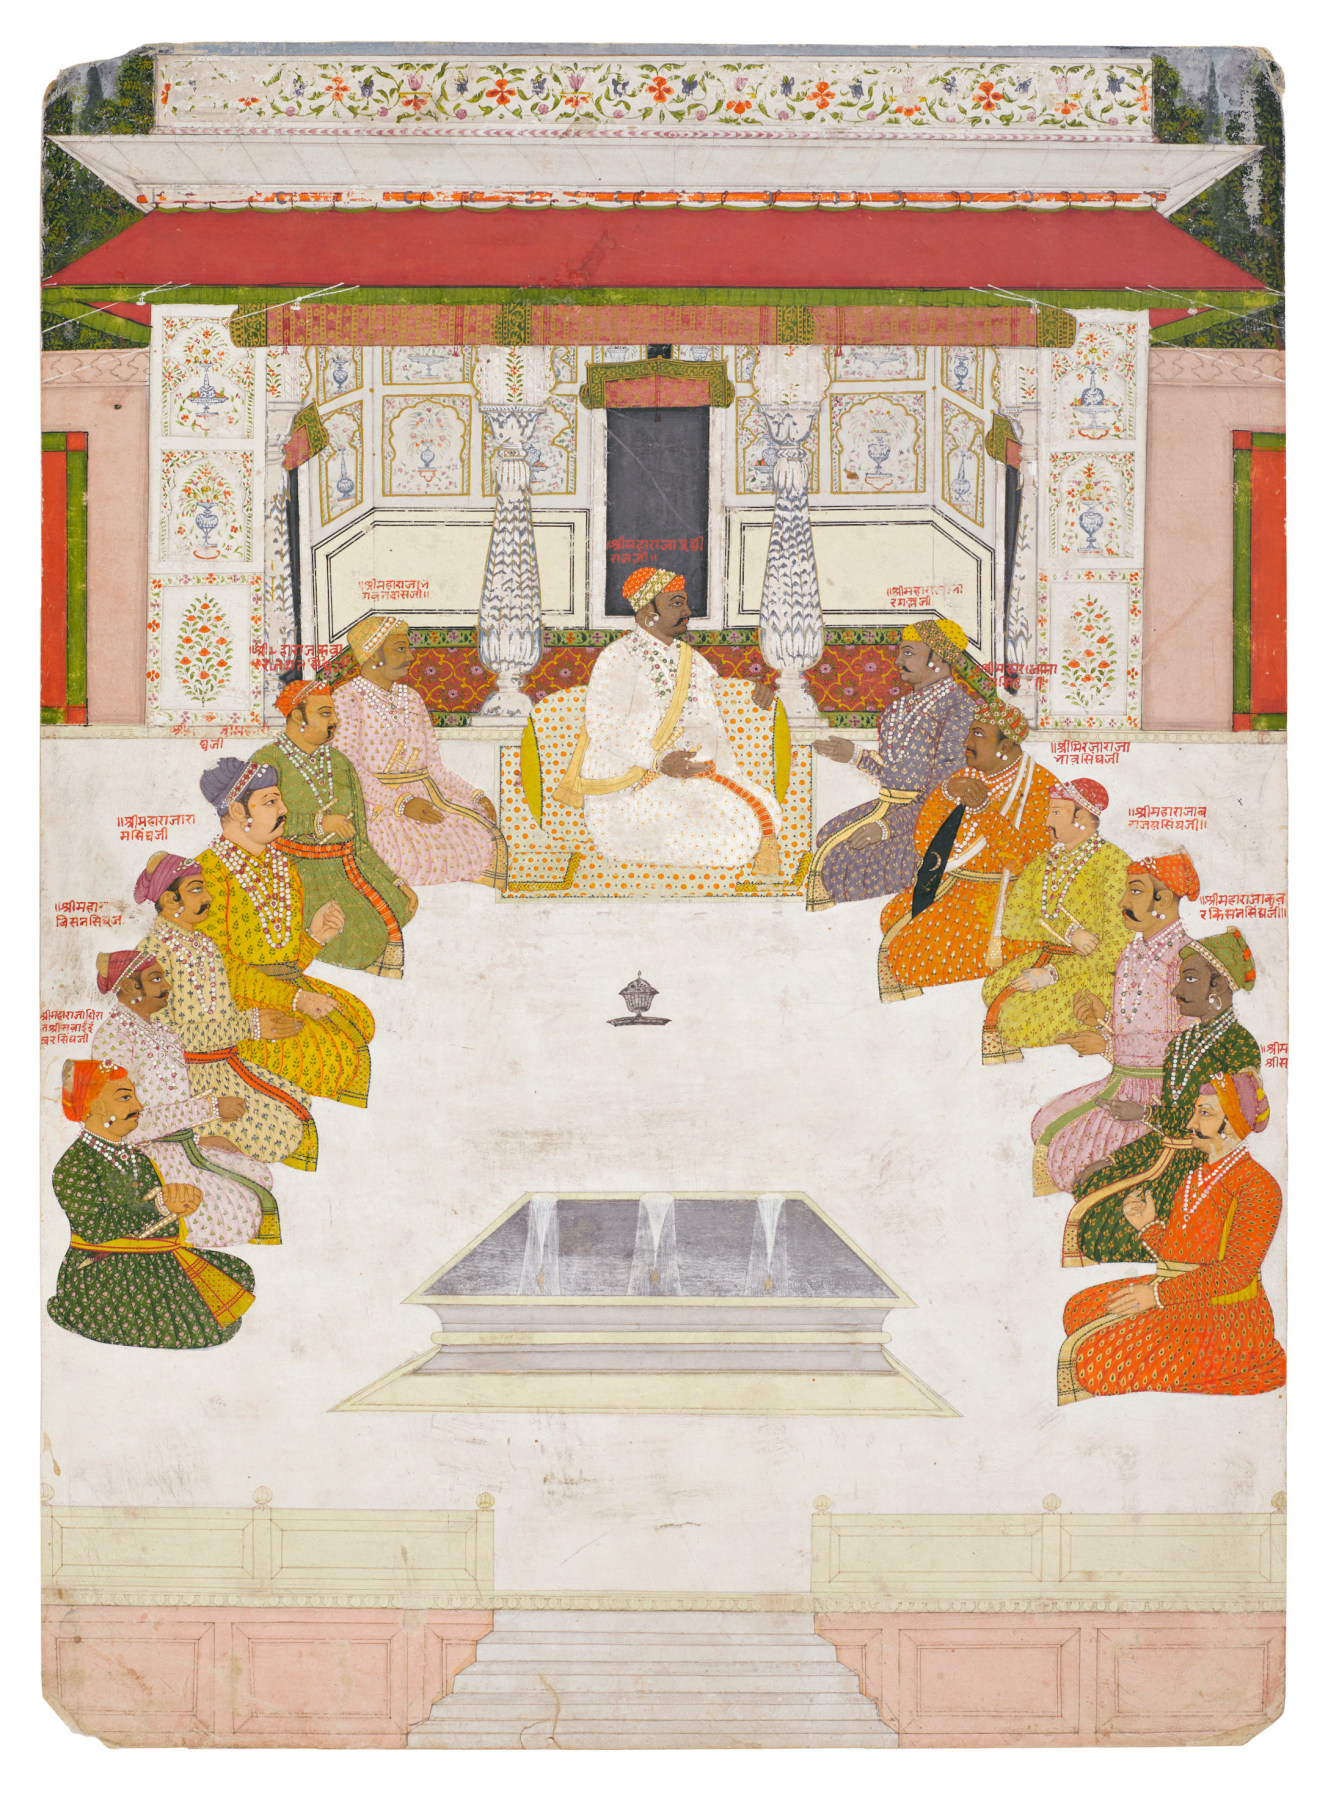 Ancestral Portraits of the Rulers of Amber and Jaipur, By a Jaipur artist, circa 1750-1760